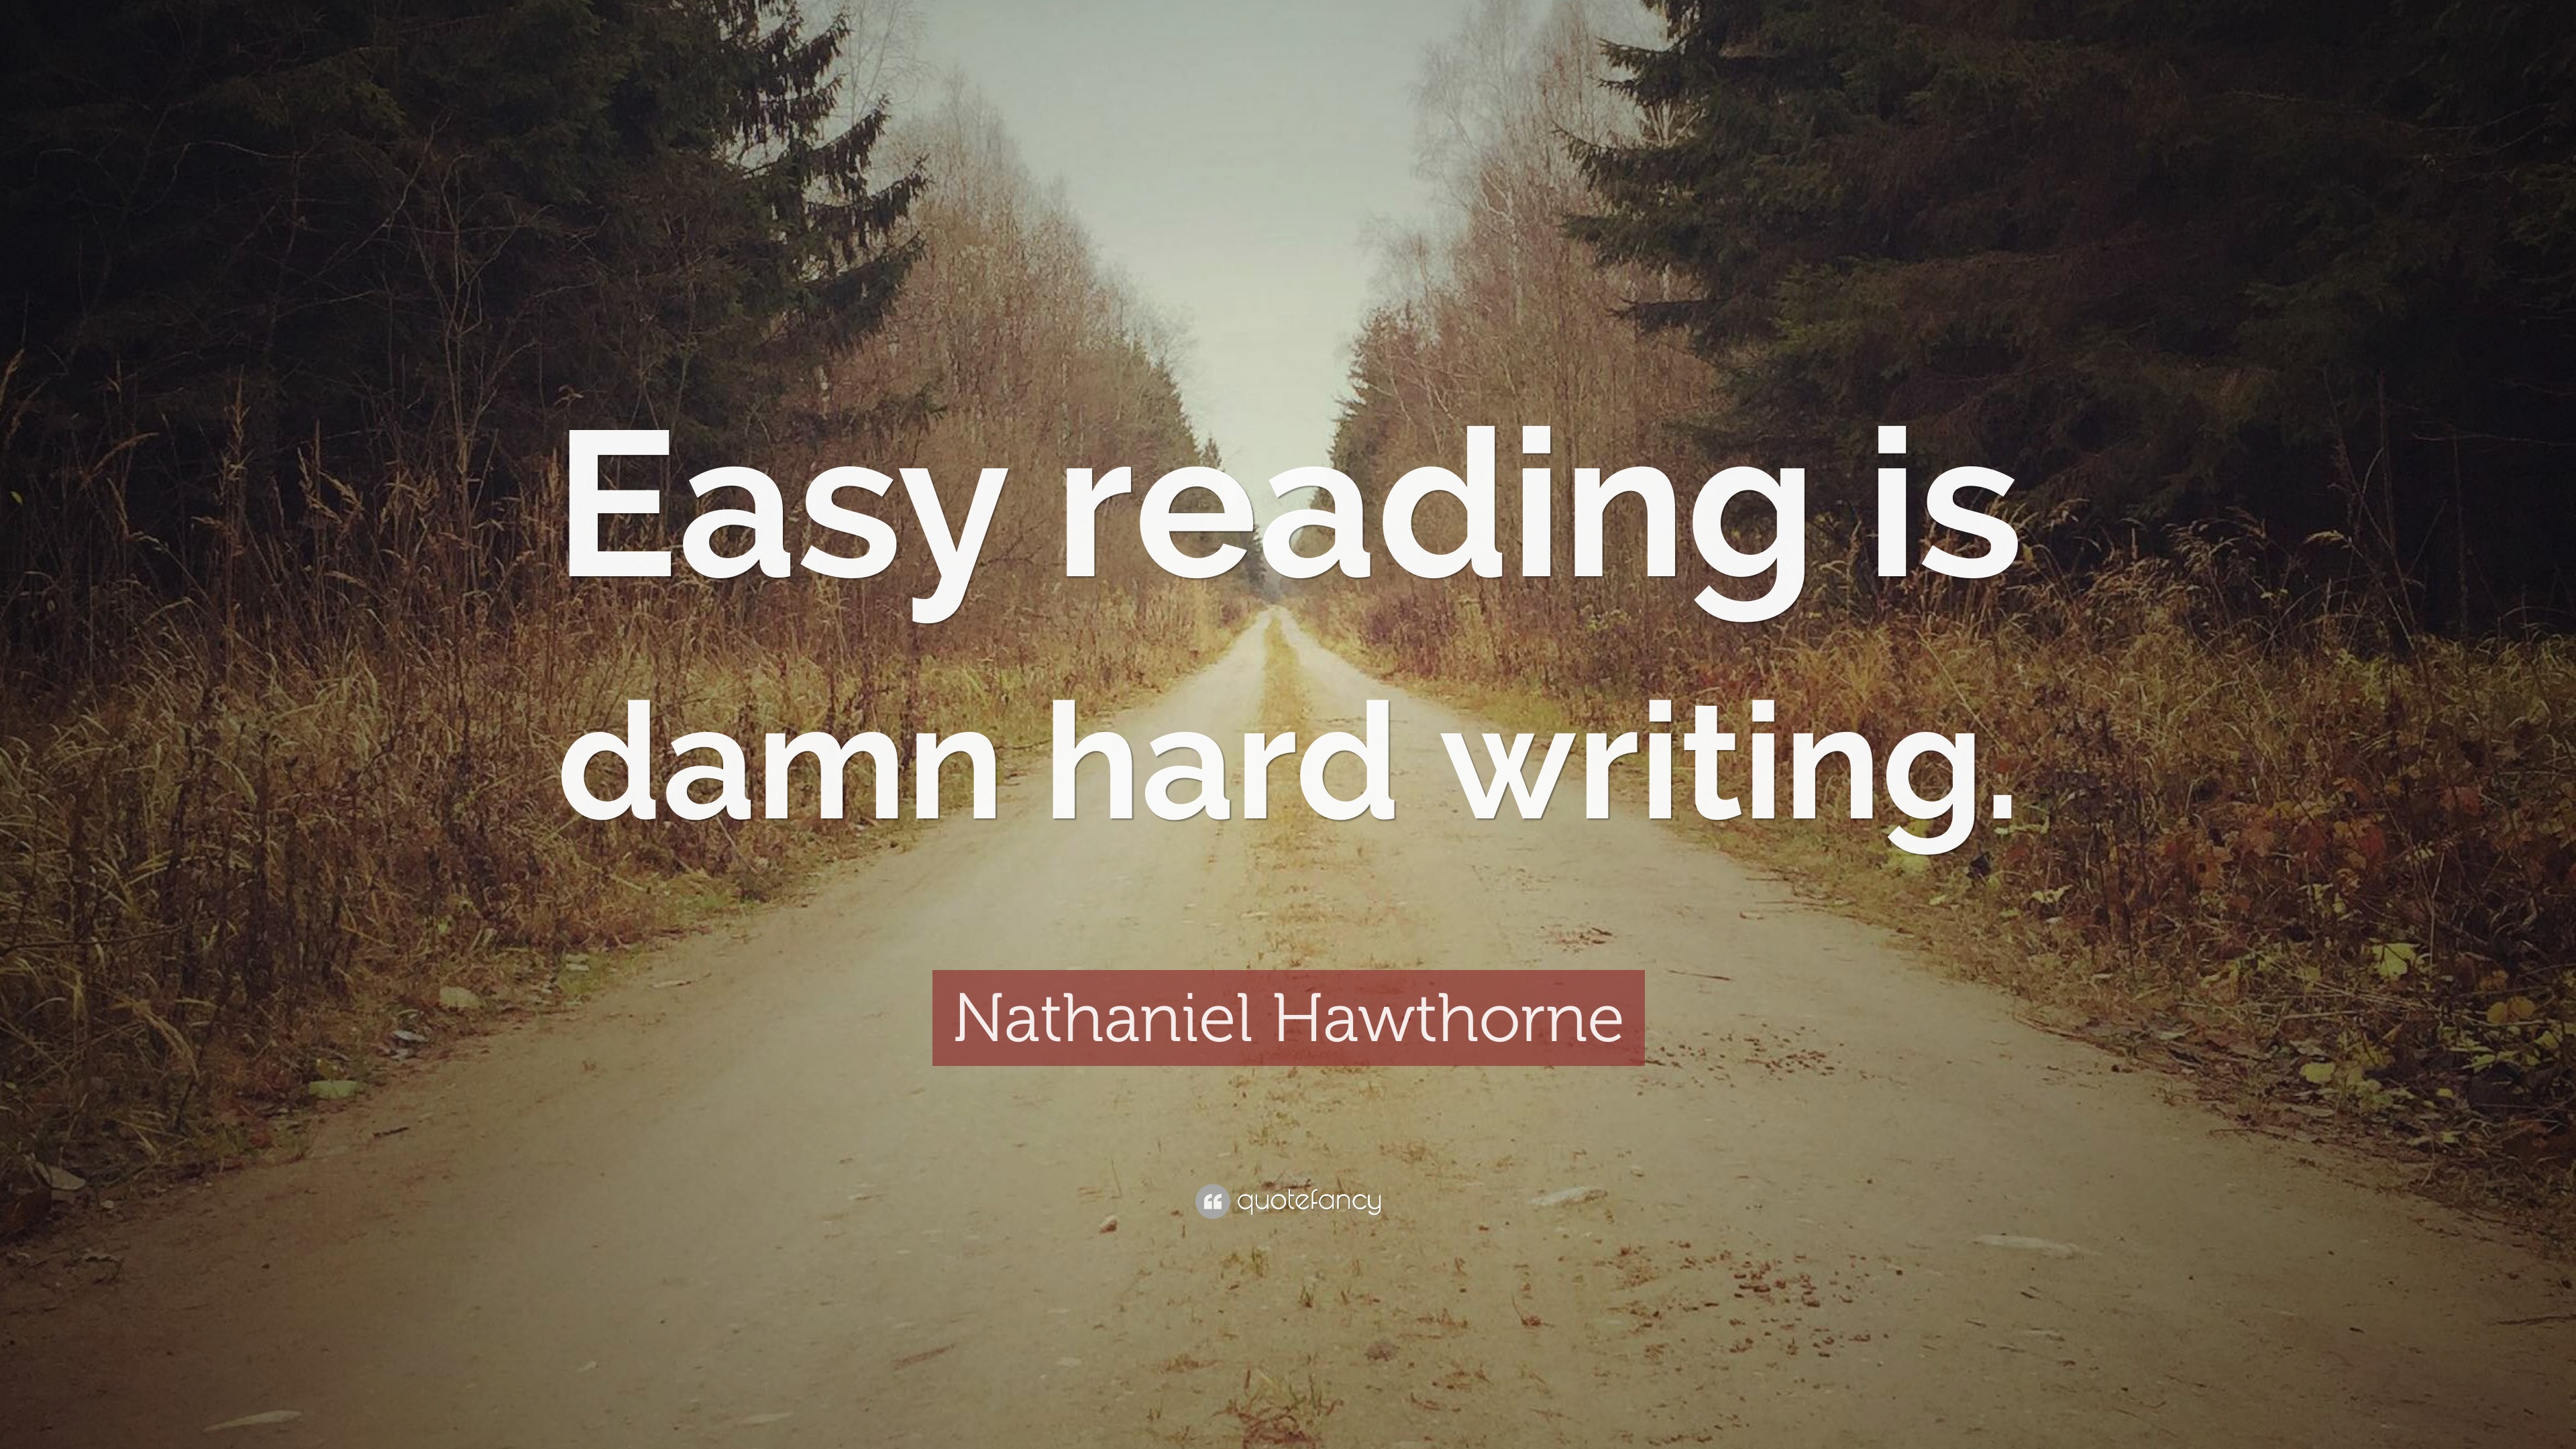 meaning of easy reading is damn hard writing